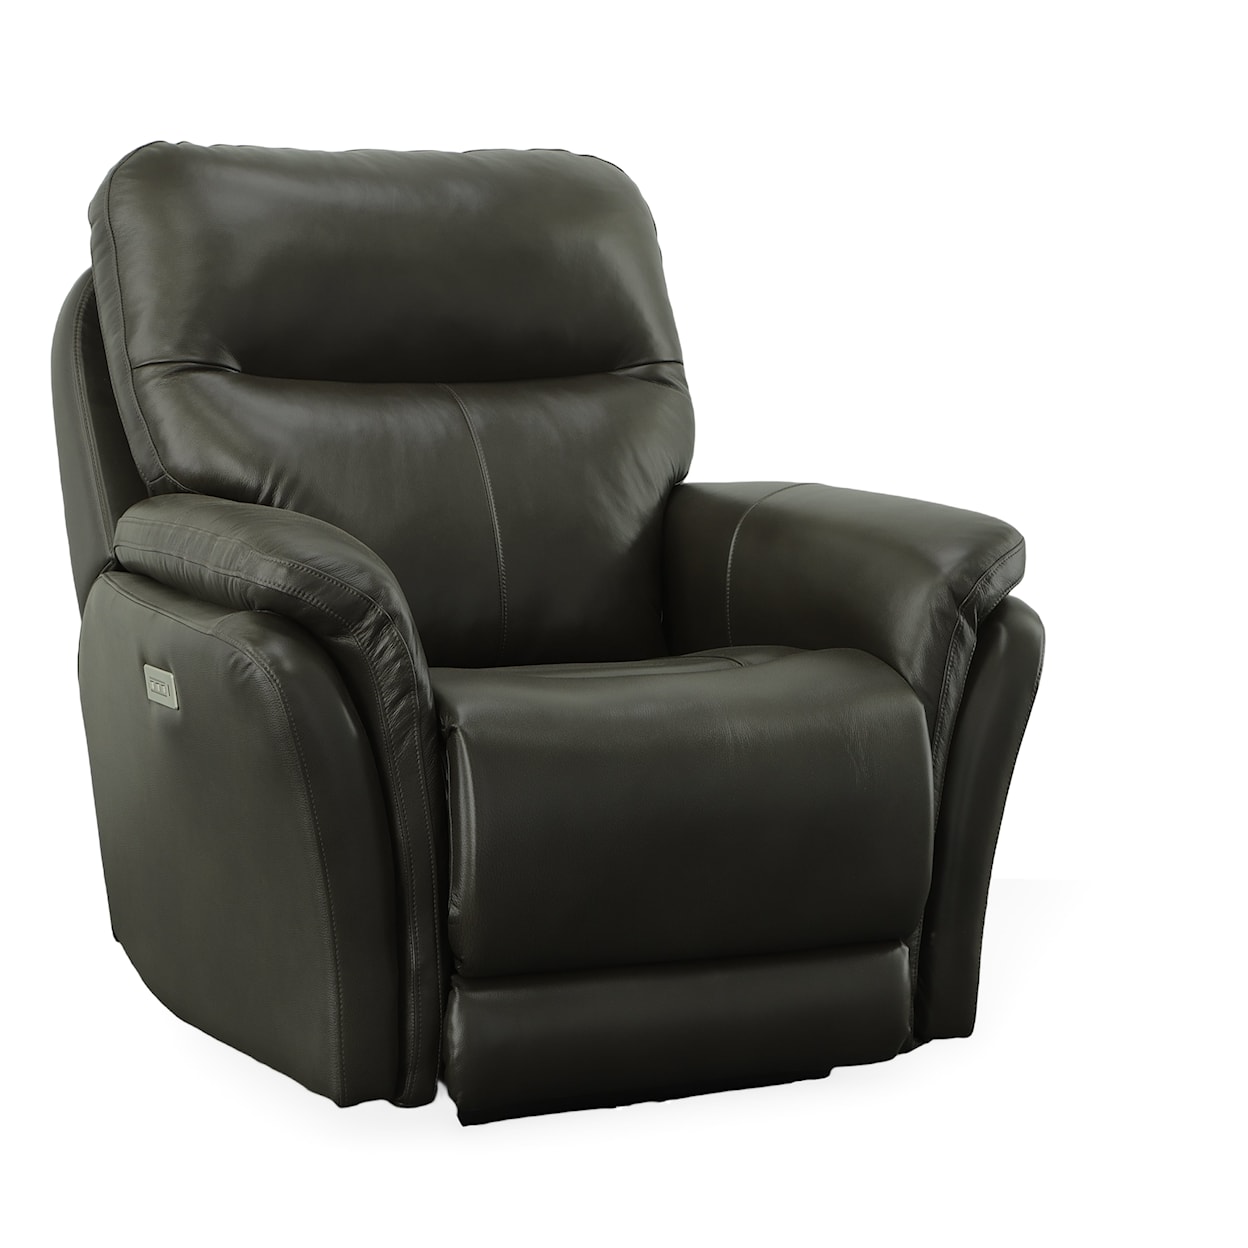 Stanton 725 Power Recliner with Headrest and Lumbar